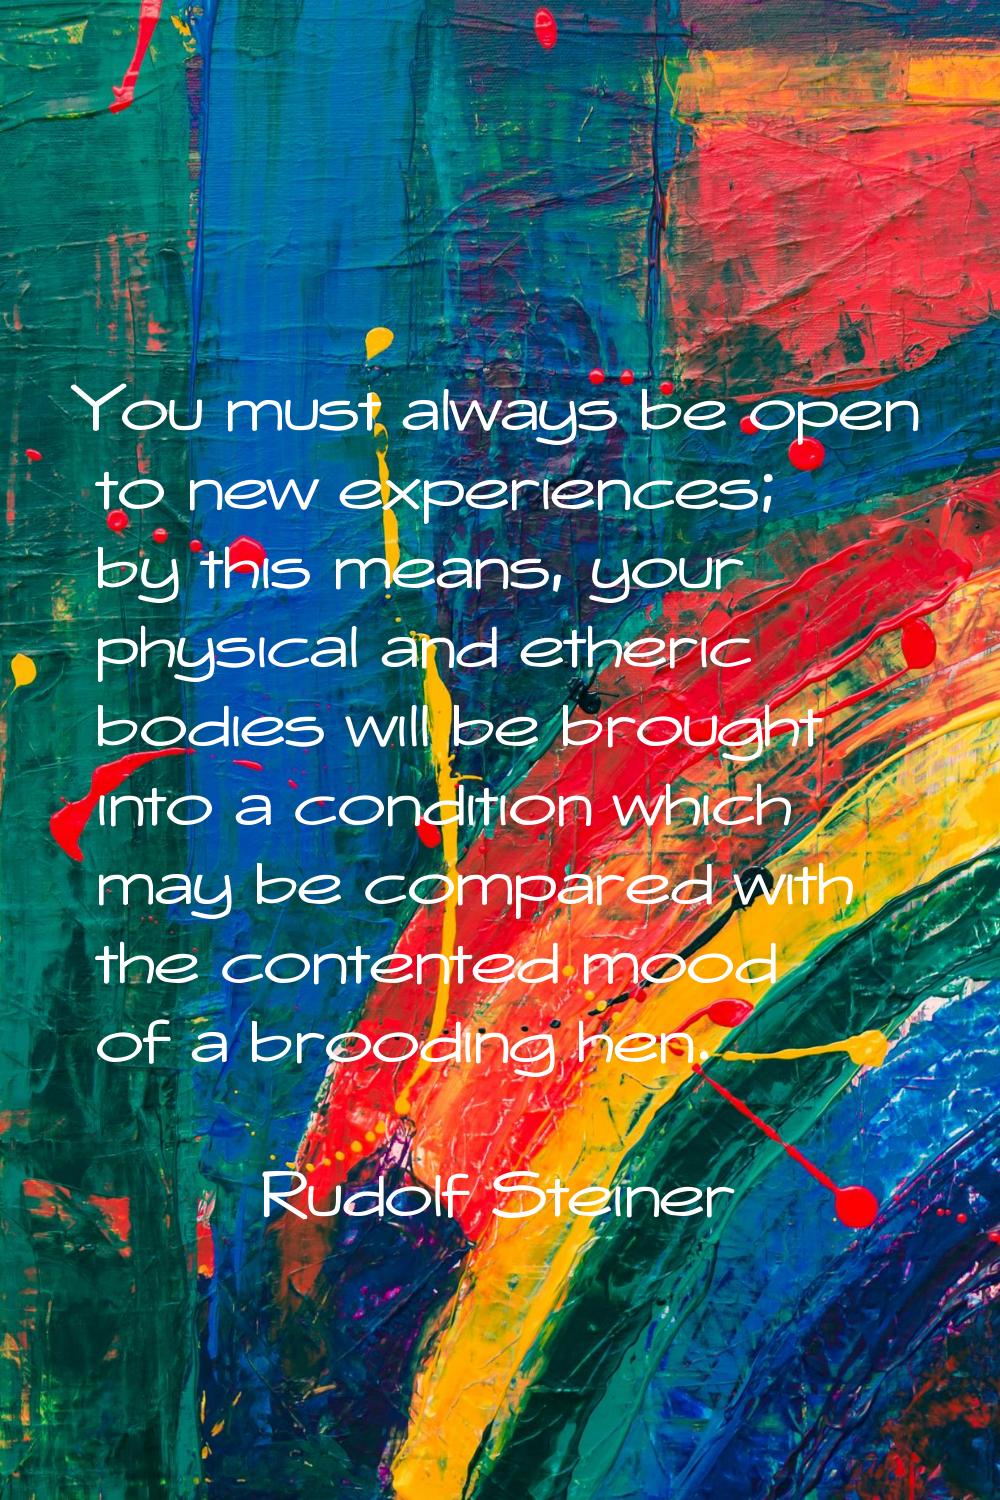 You must always be open to new experiences; by this means, your physical and etheric bodies will be